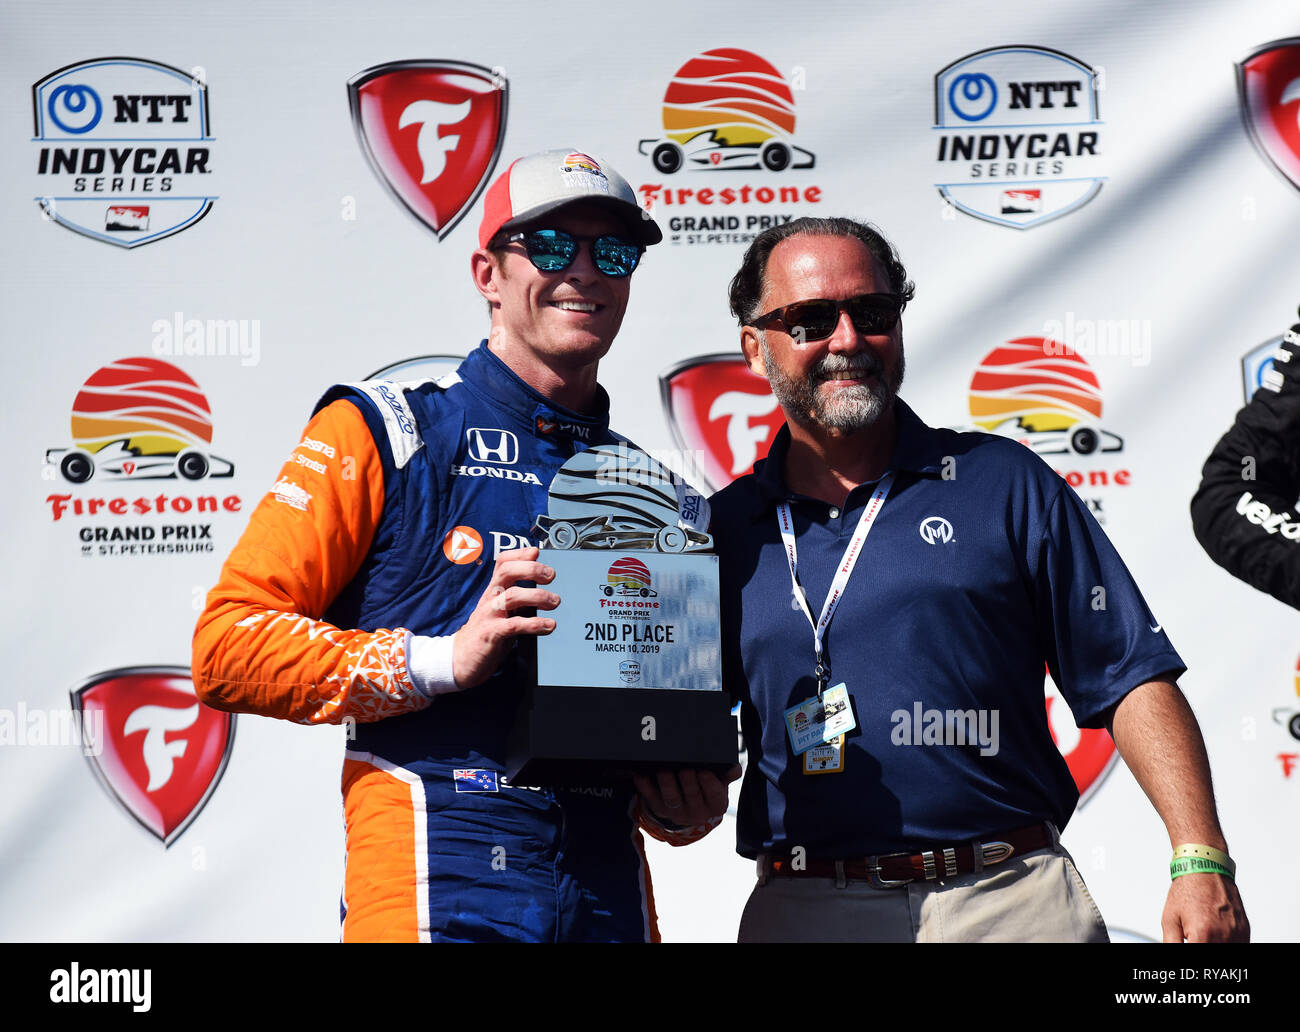 March 10, 2019 - St. Petersburg, Florida, United States - Chip Ganassi Racing driver Scott Dixon of New Zealand holds the second place trophy at the Firestone Grand Prix of St. Petersburg on March 10, 2019 in St. Petersburg, Florida. Josef Newgarden of the United States won the race. (Paul Hennessy/Alamy) Stock Photo